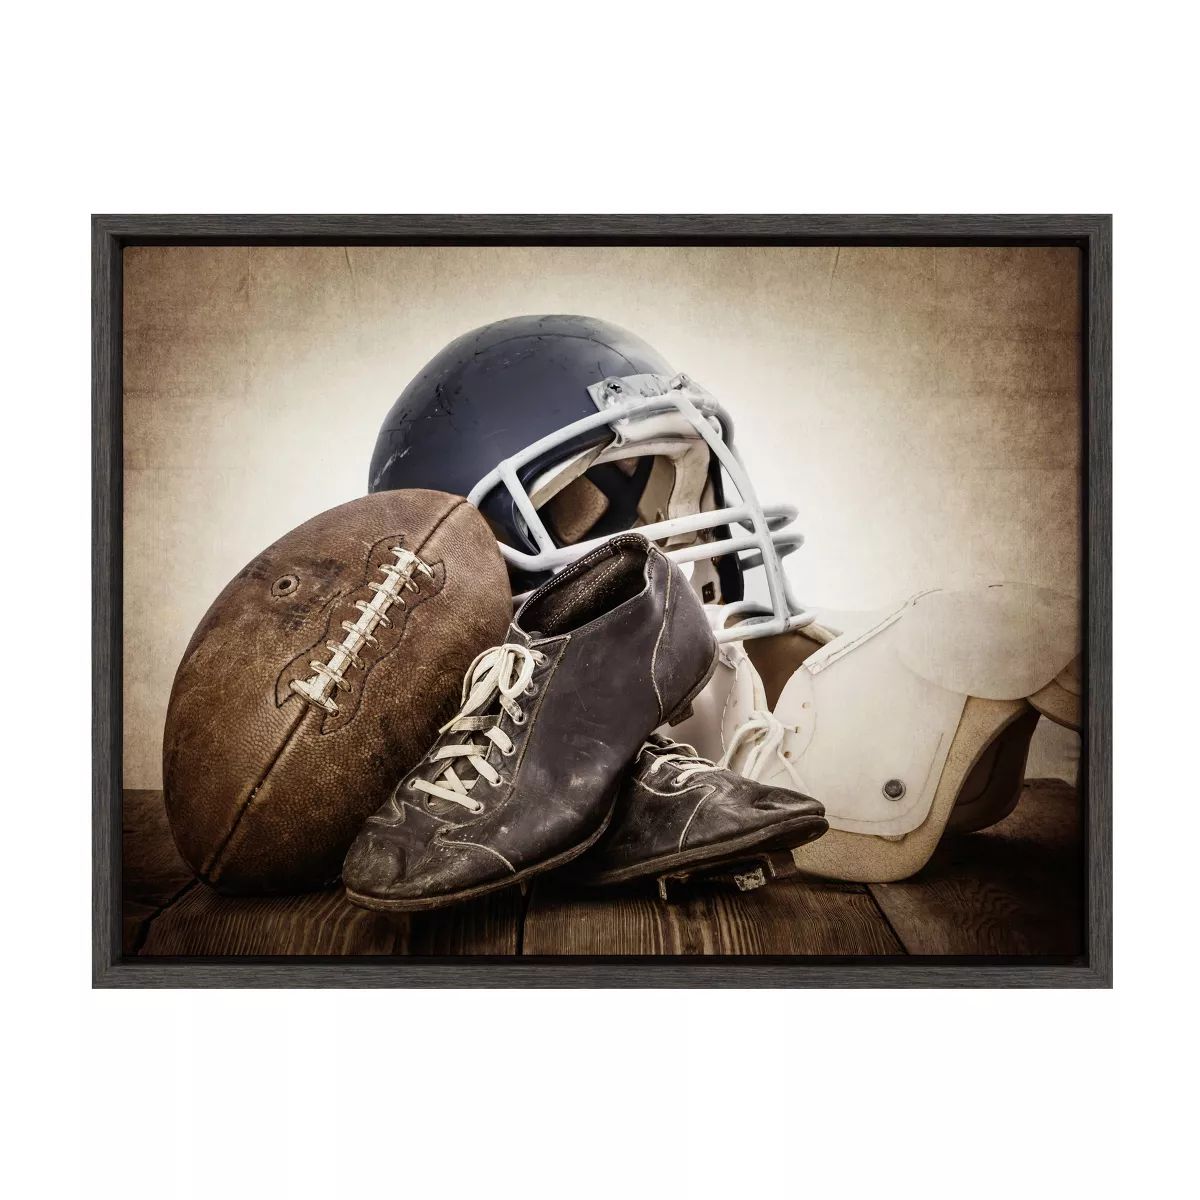 18" x 24" Sylvie Vintage Football Gear Framed Canvas by Shawn St. Peter Gray - DesignOvation | Target